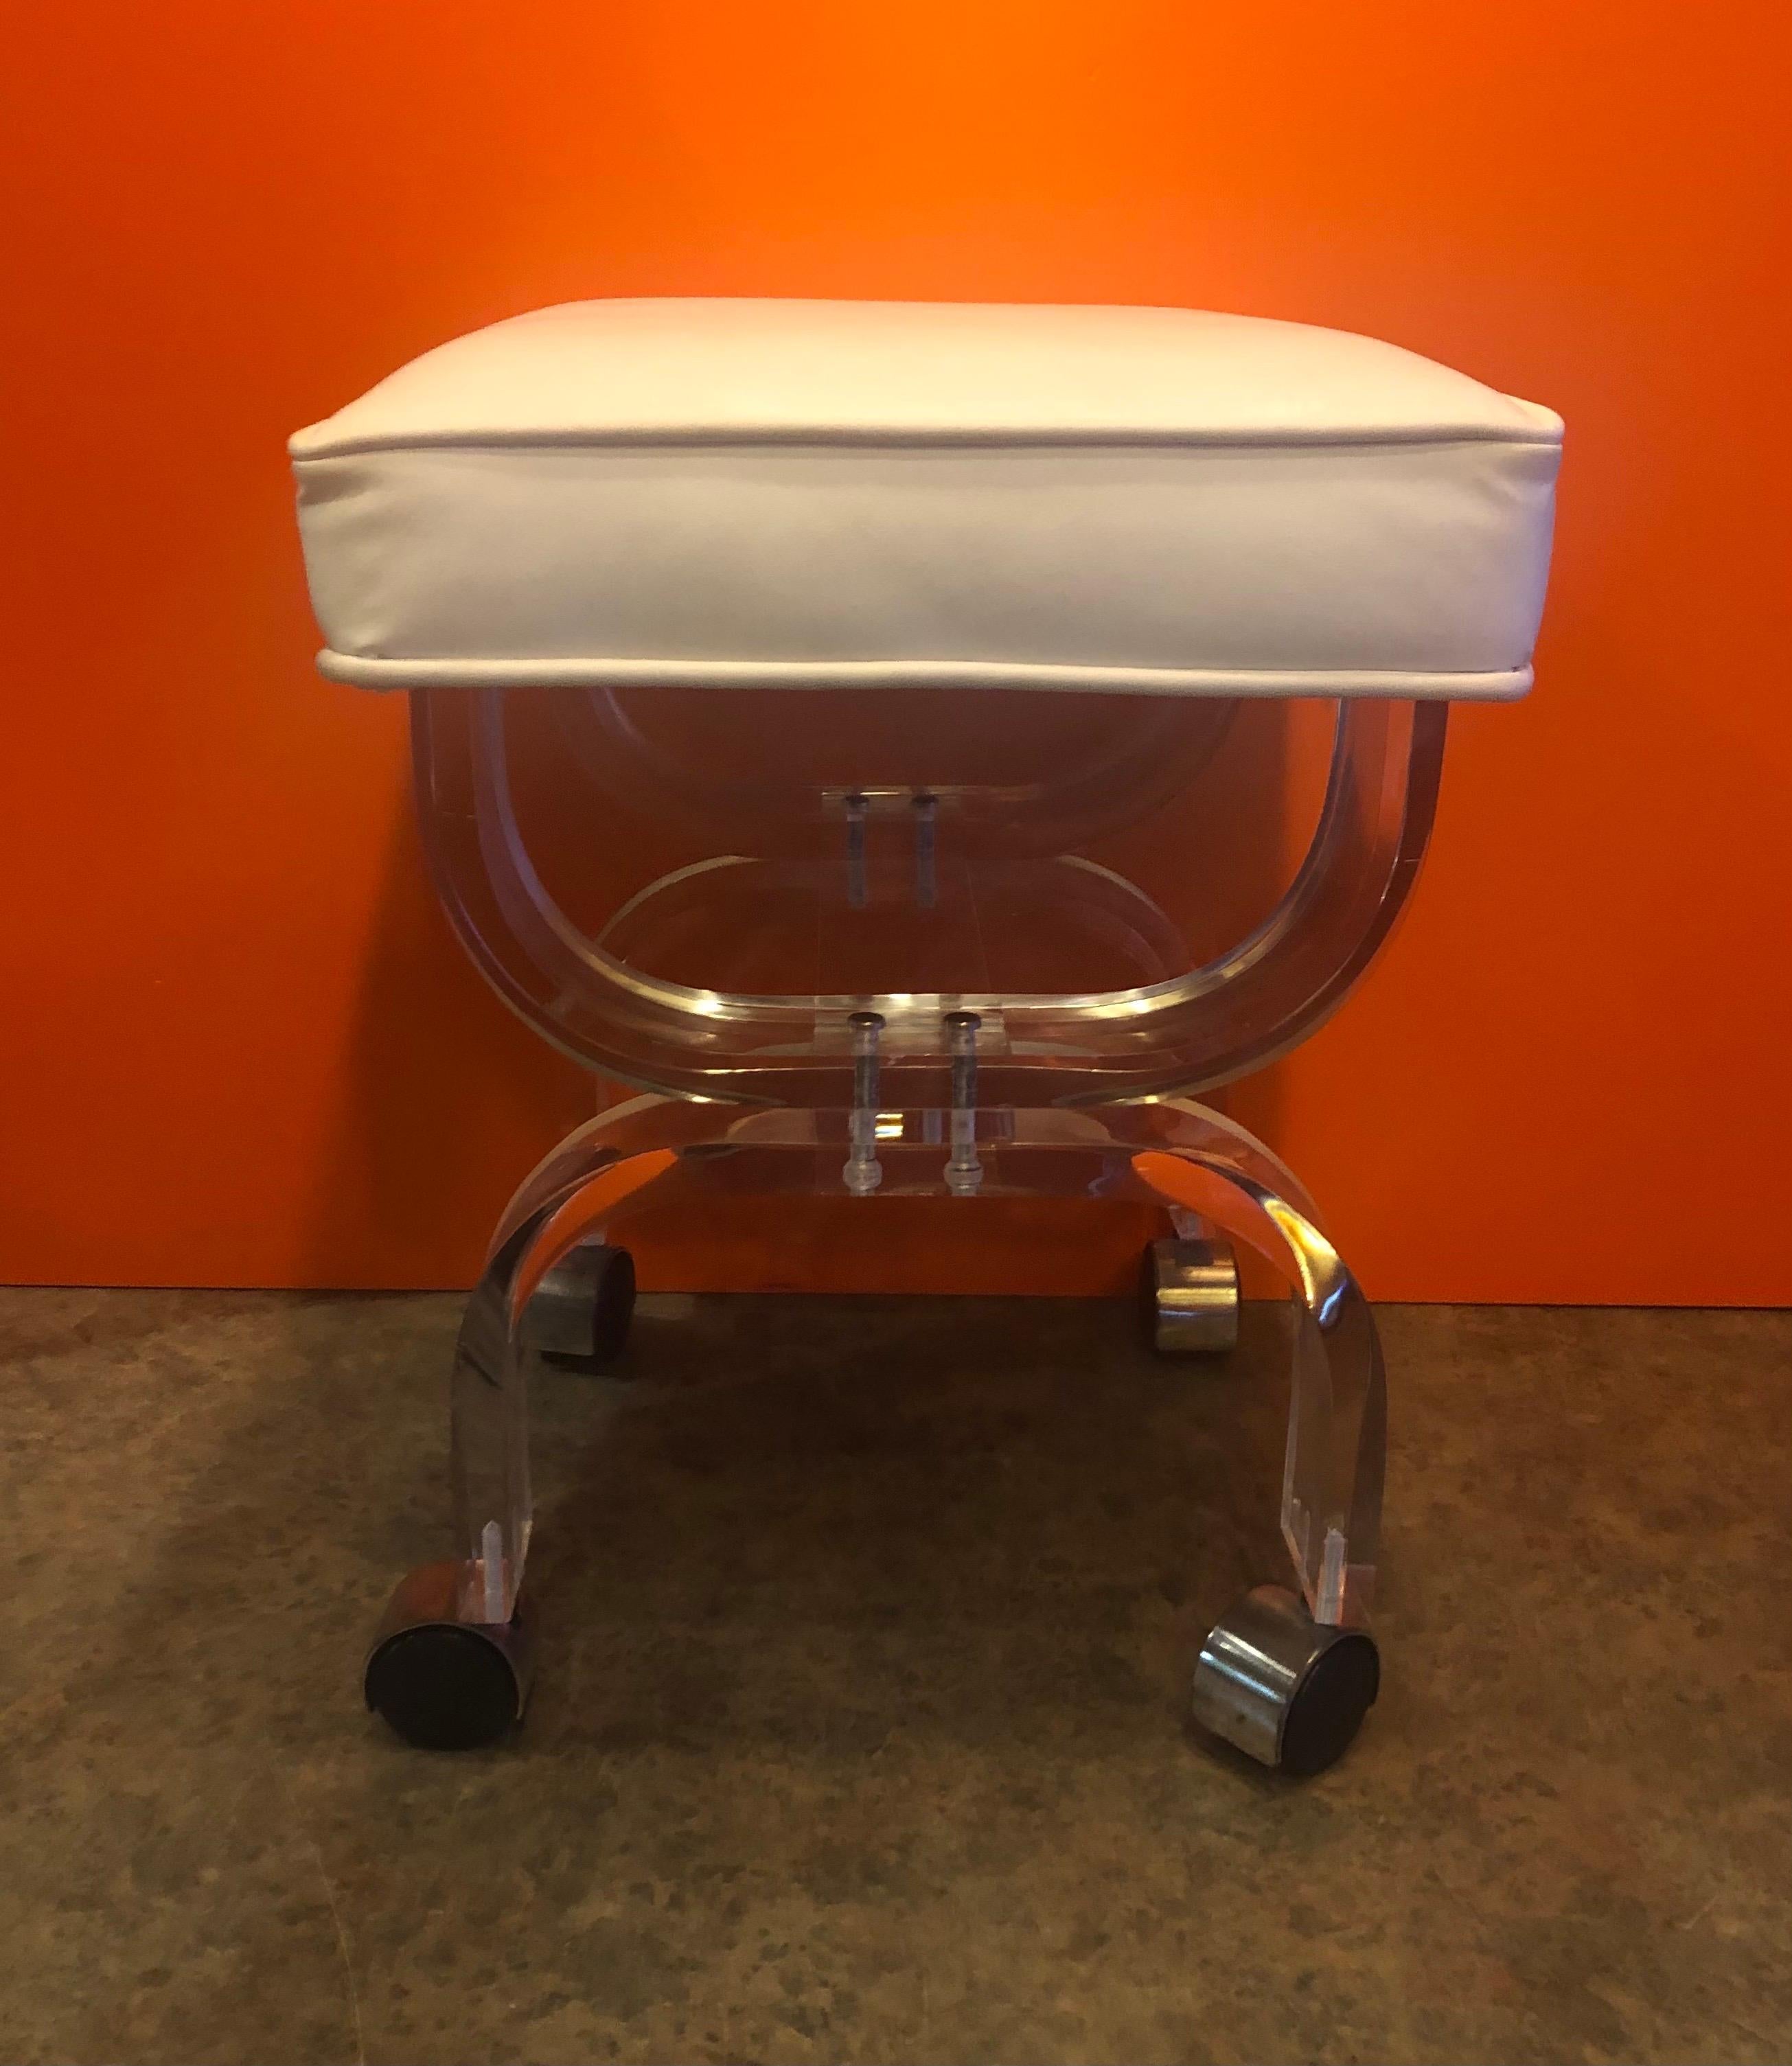 Naugahyde Midcentury Lucite Vanity Stool or Bench with White Seat